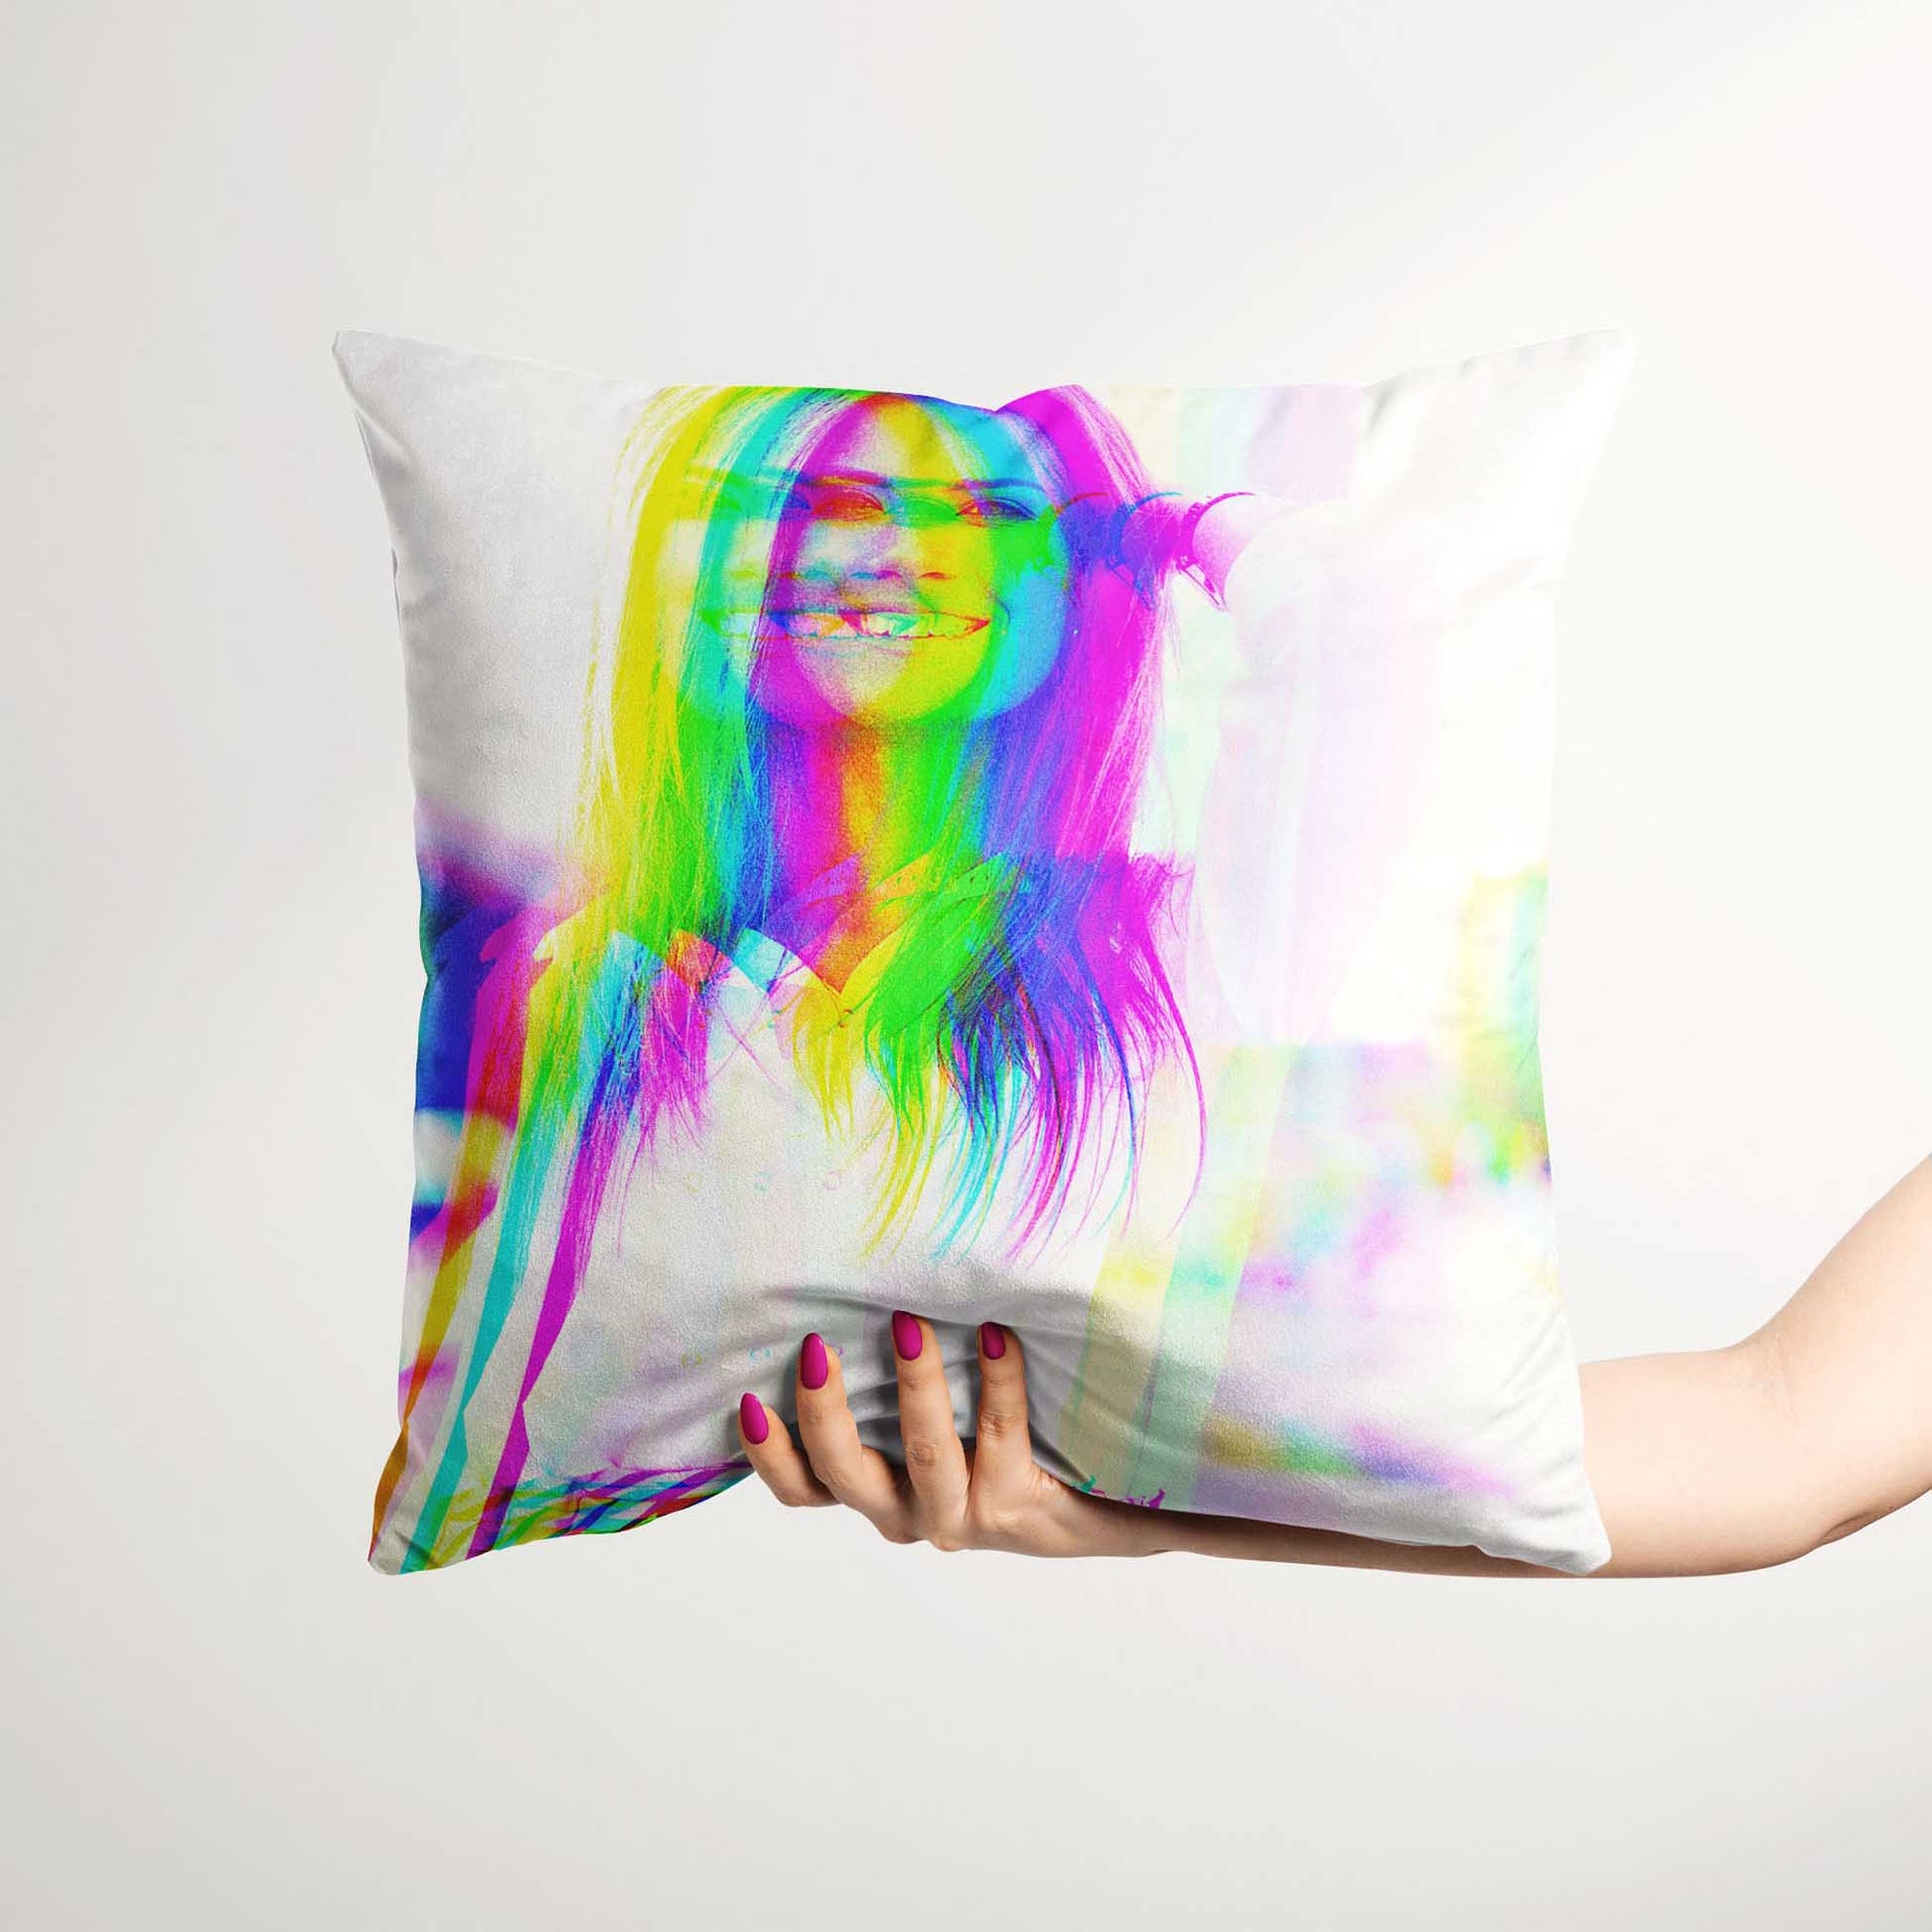 Immerse yourself in the luxury of the Personalised Anaglyph 3D Cushion. Its velvet fabric invites you to unwind and rest in its cosy embrace. The print from your photo brings a personal and elegant touch